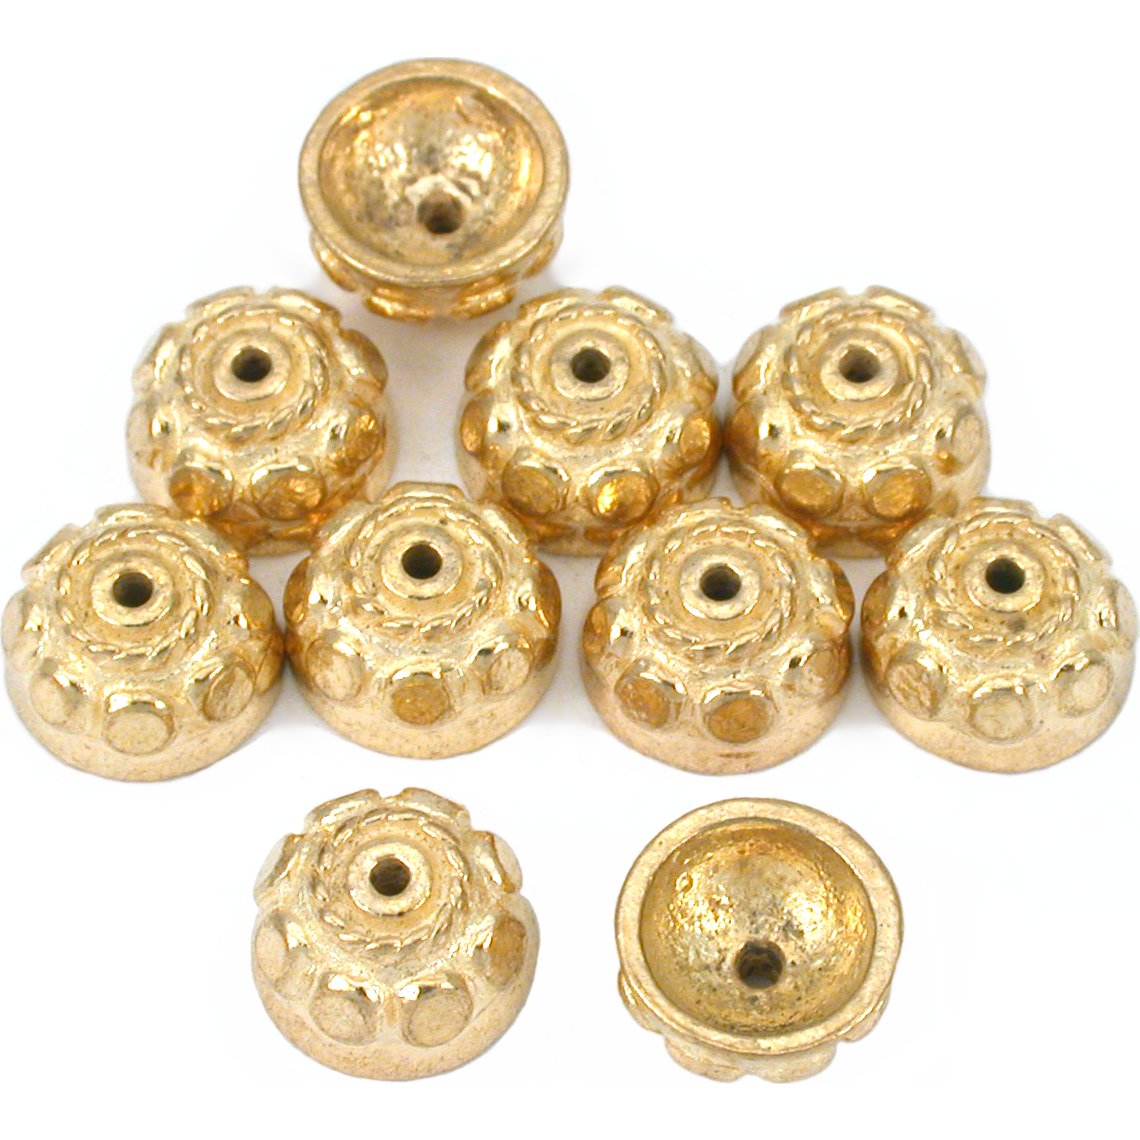 Bali Bead Caps Gold Plated 9.5mm 10Pcs Approx.